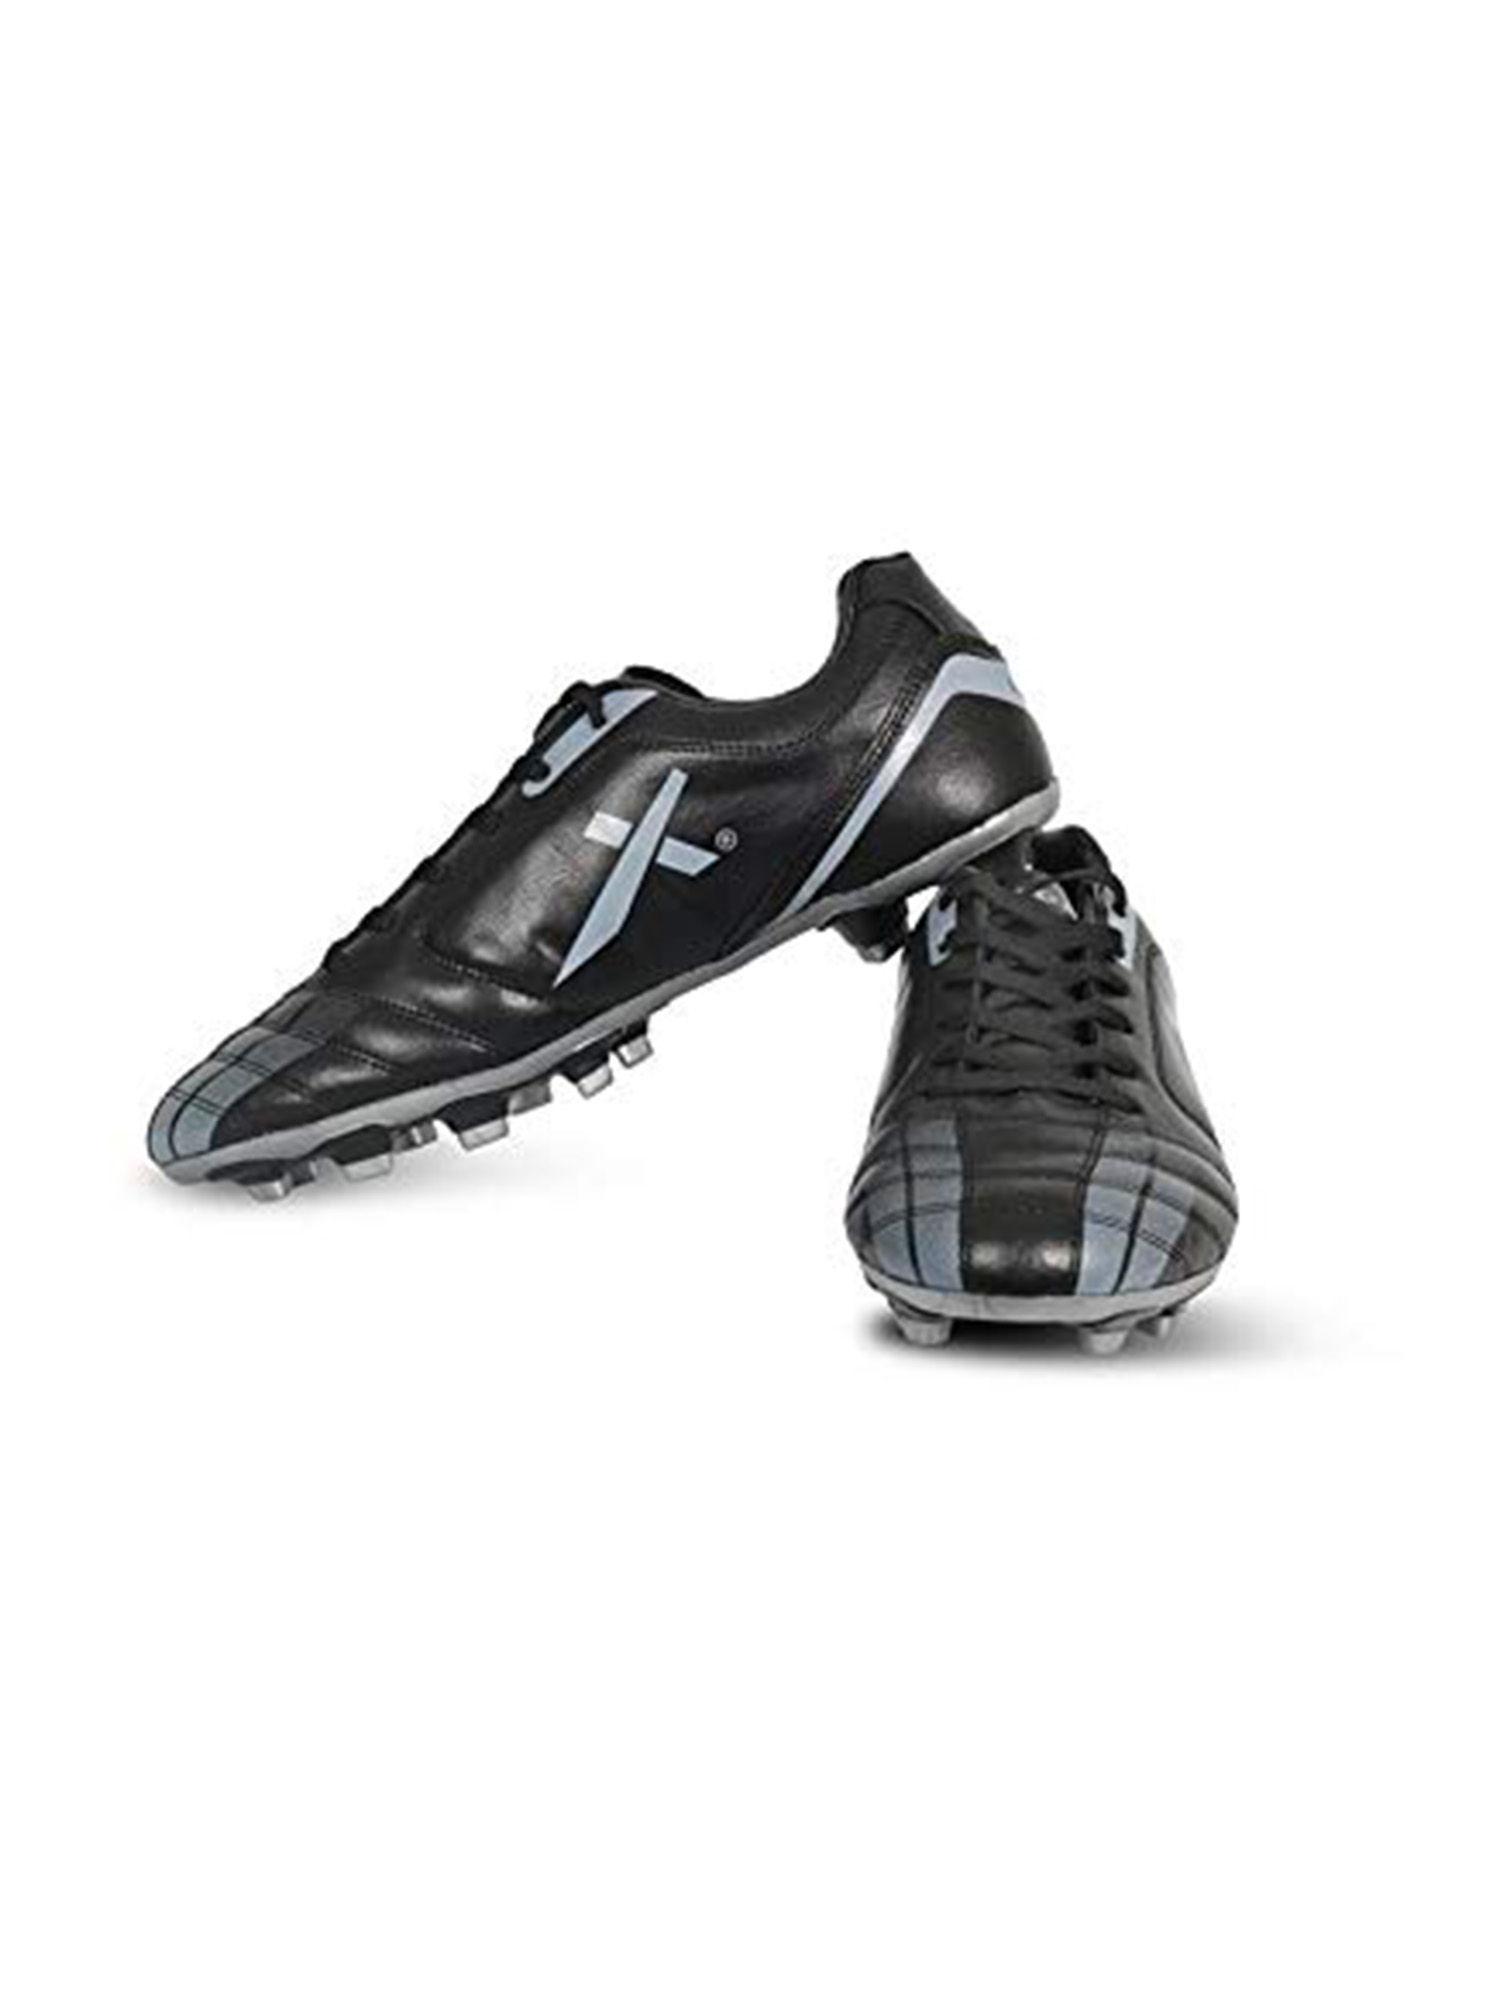 speed football shoes for men - black - grey